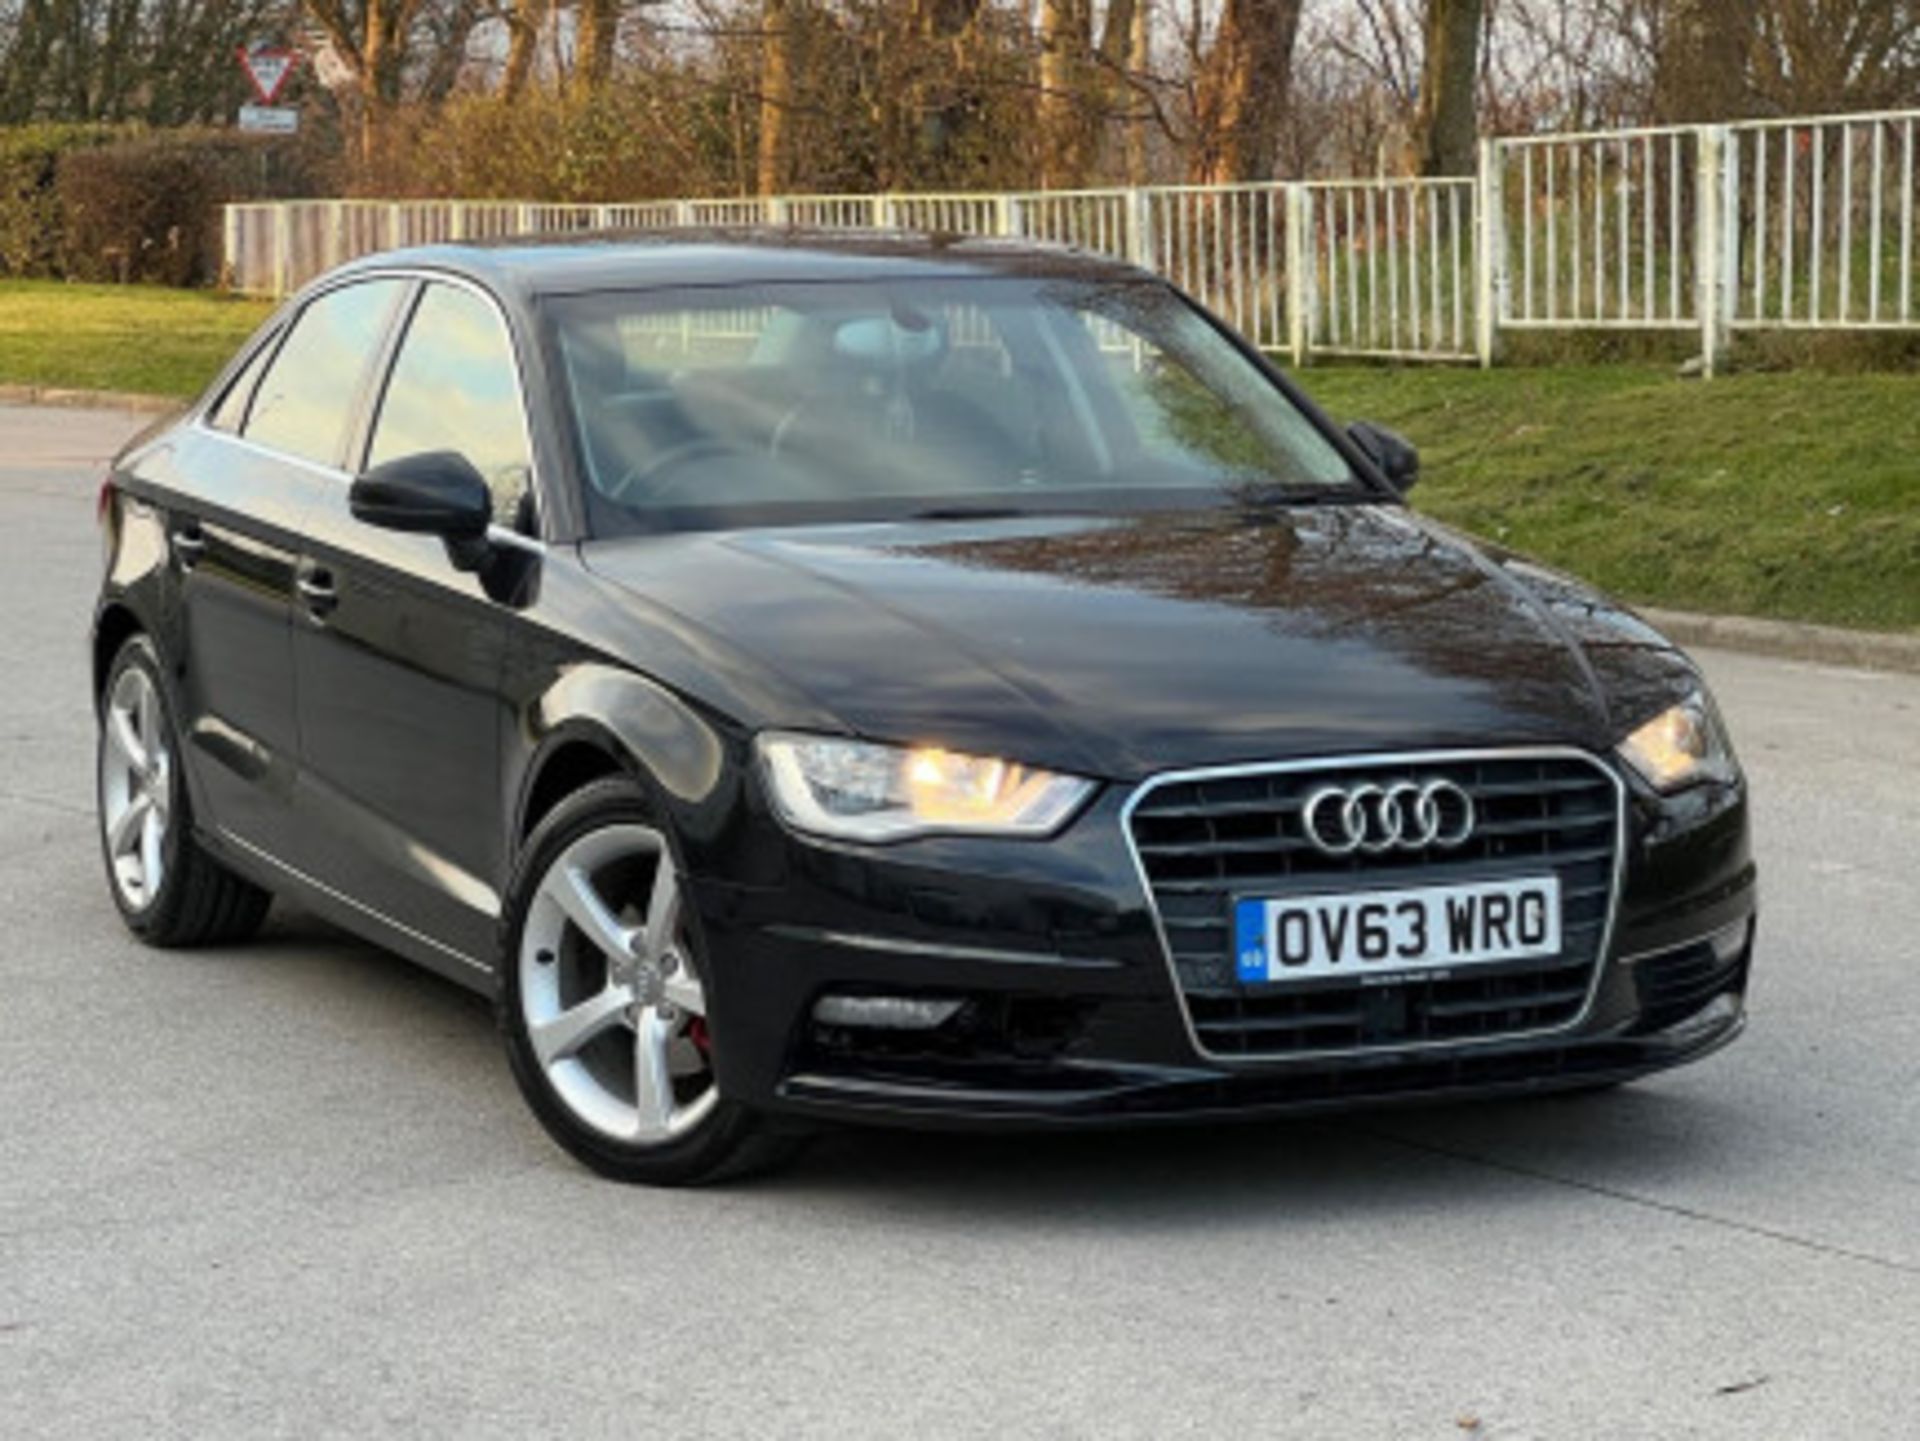 AUDI A3 2.0TDI SPORTBACK - STYLE, PERFORMANCE, AND COMFORT COMBINED >>--NO VAT ON HAMMER--<< - Image 35 of 216